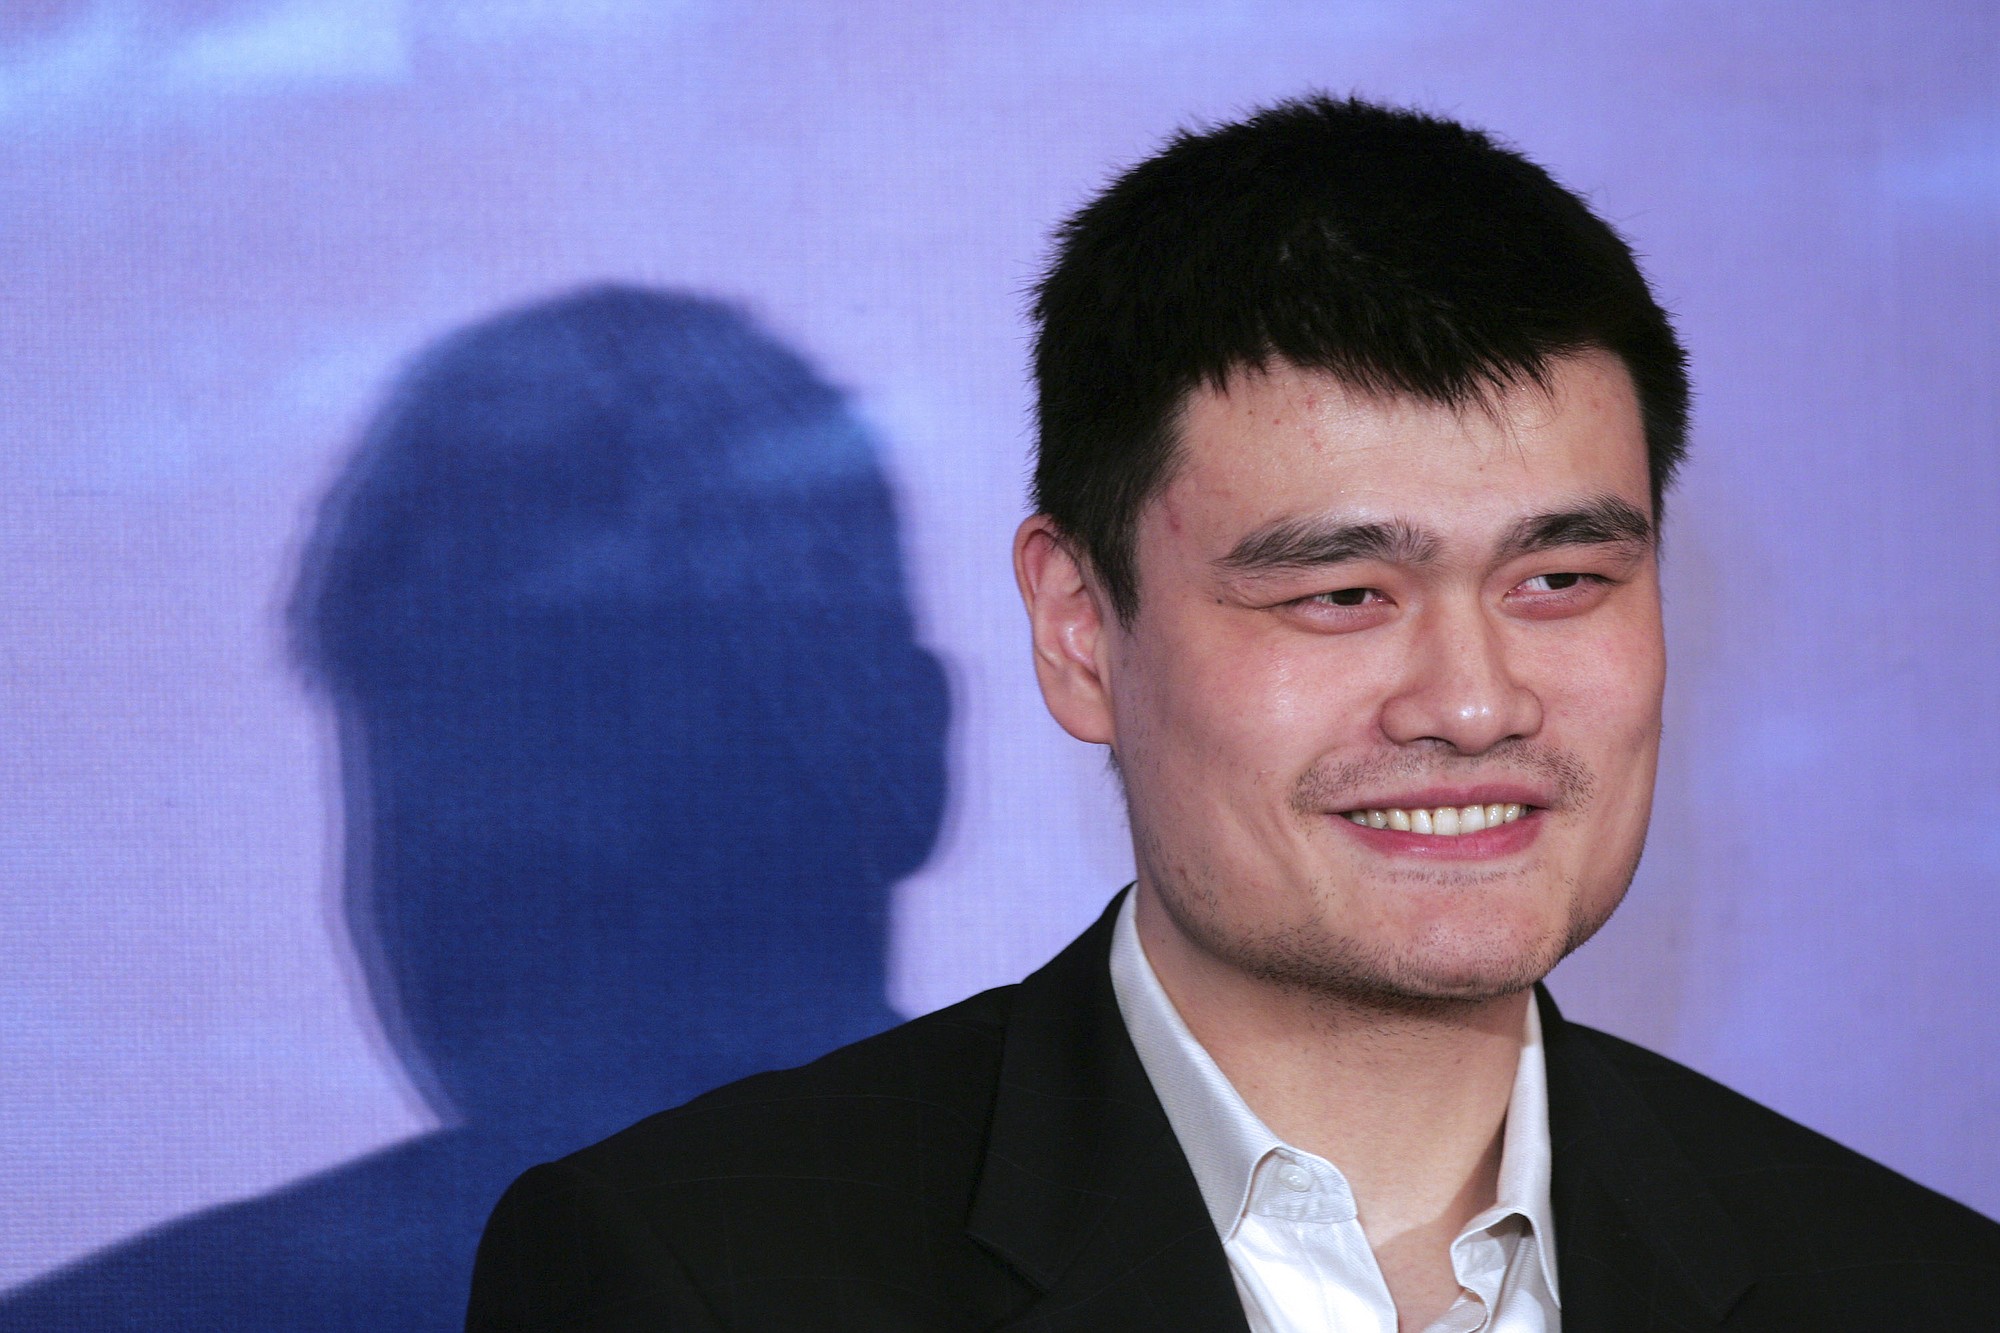 Yao Ming helped make the NBA widely popular in China.